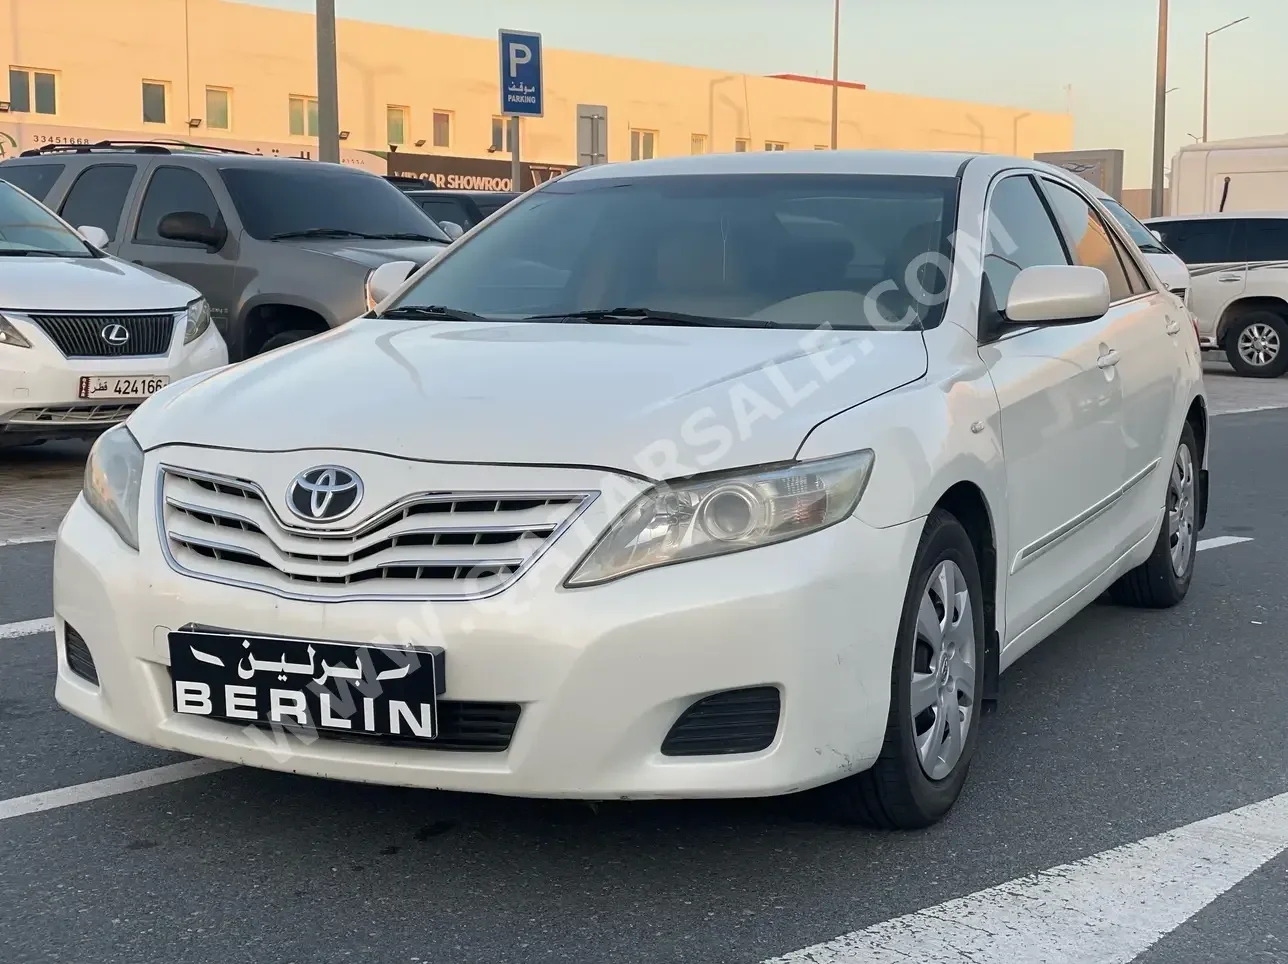 Toyota  Camry  GL  2011  Automatic  193,000 Km  4 Cylinder  Front Wheel Drive (FWD)  Sedan  White